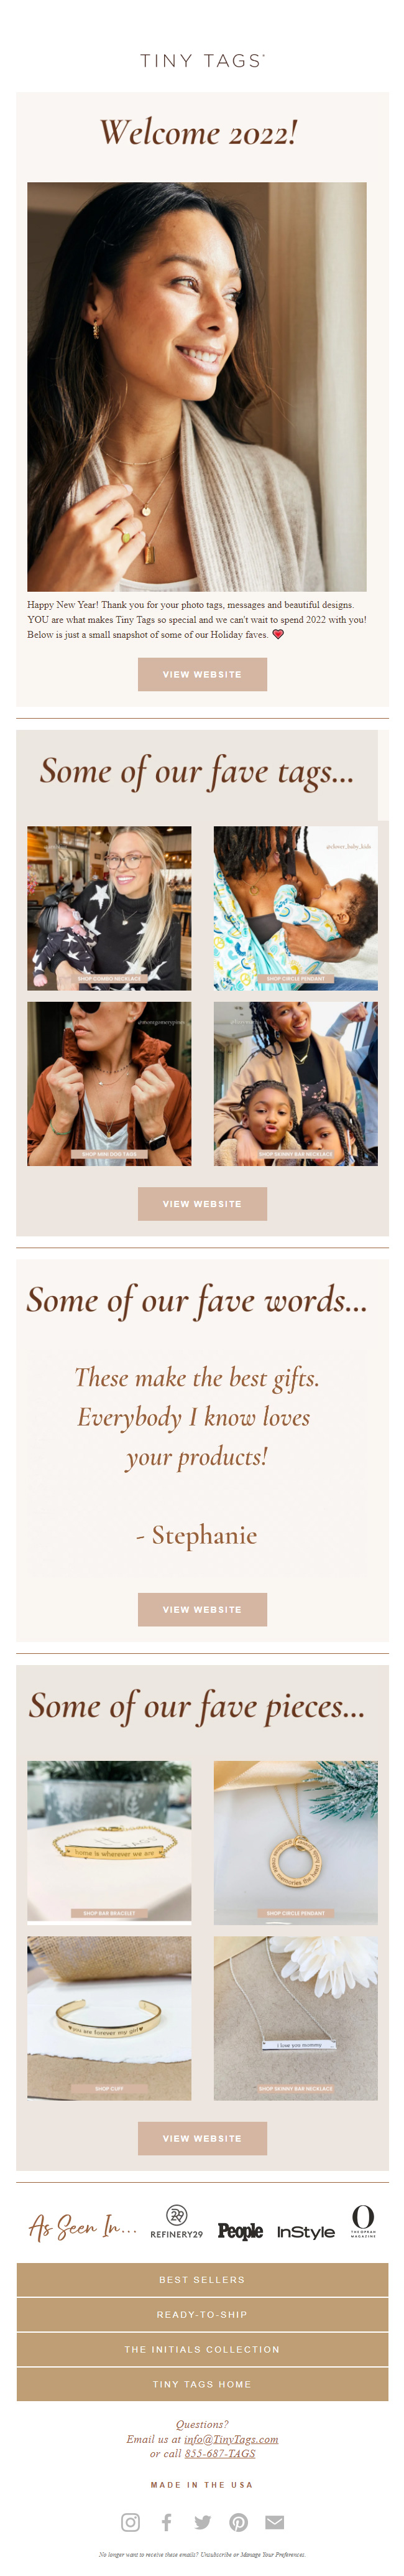 Tiny Tags-  New year Email Inspiration